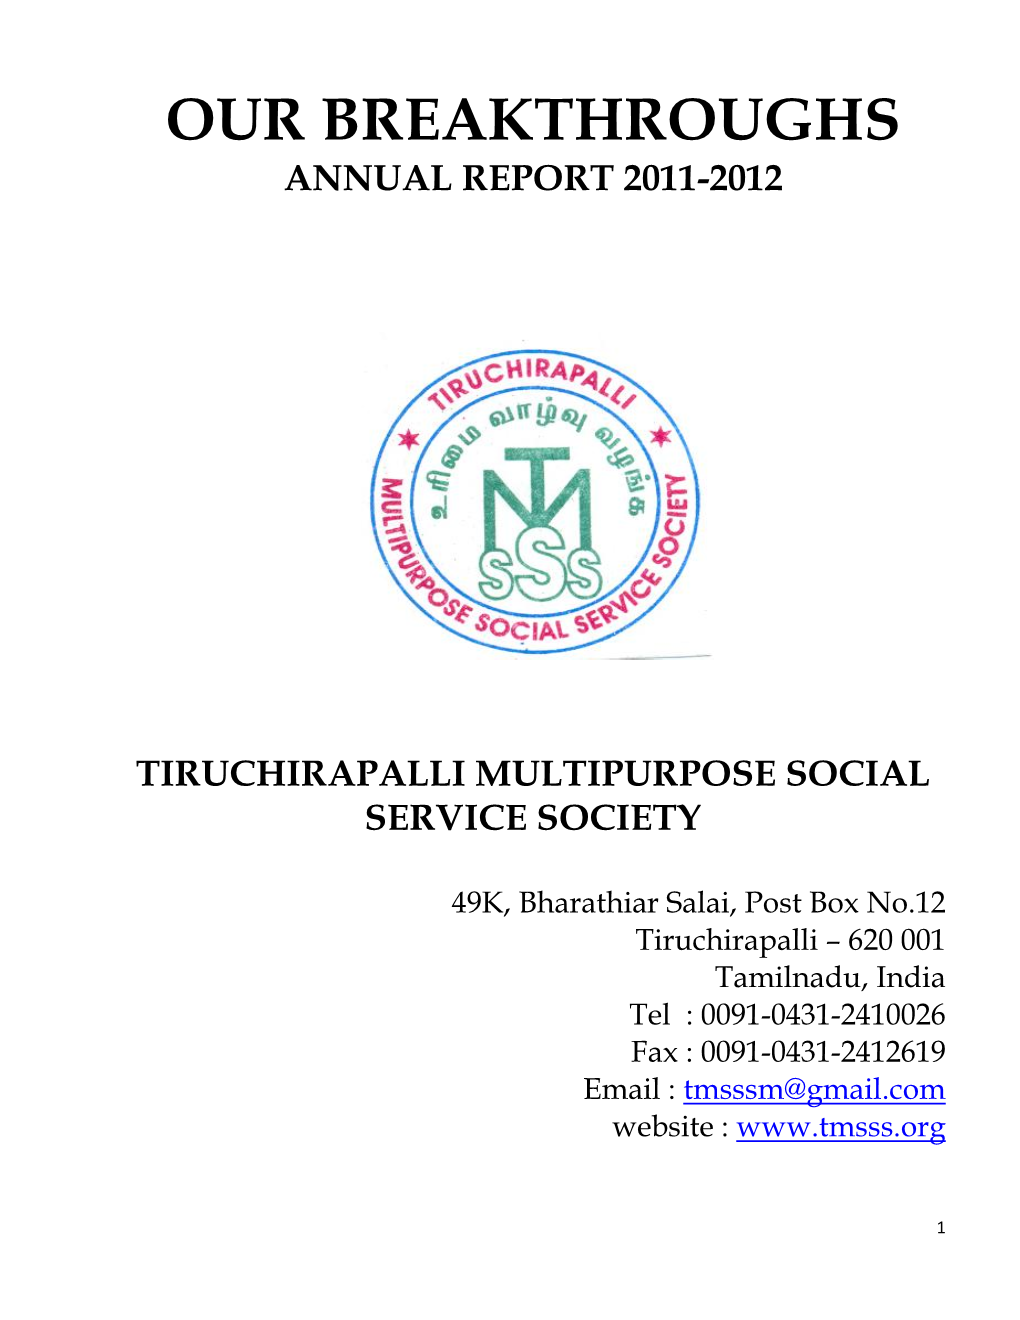 Our Breakthroughs Annual Report 2011-2012